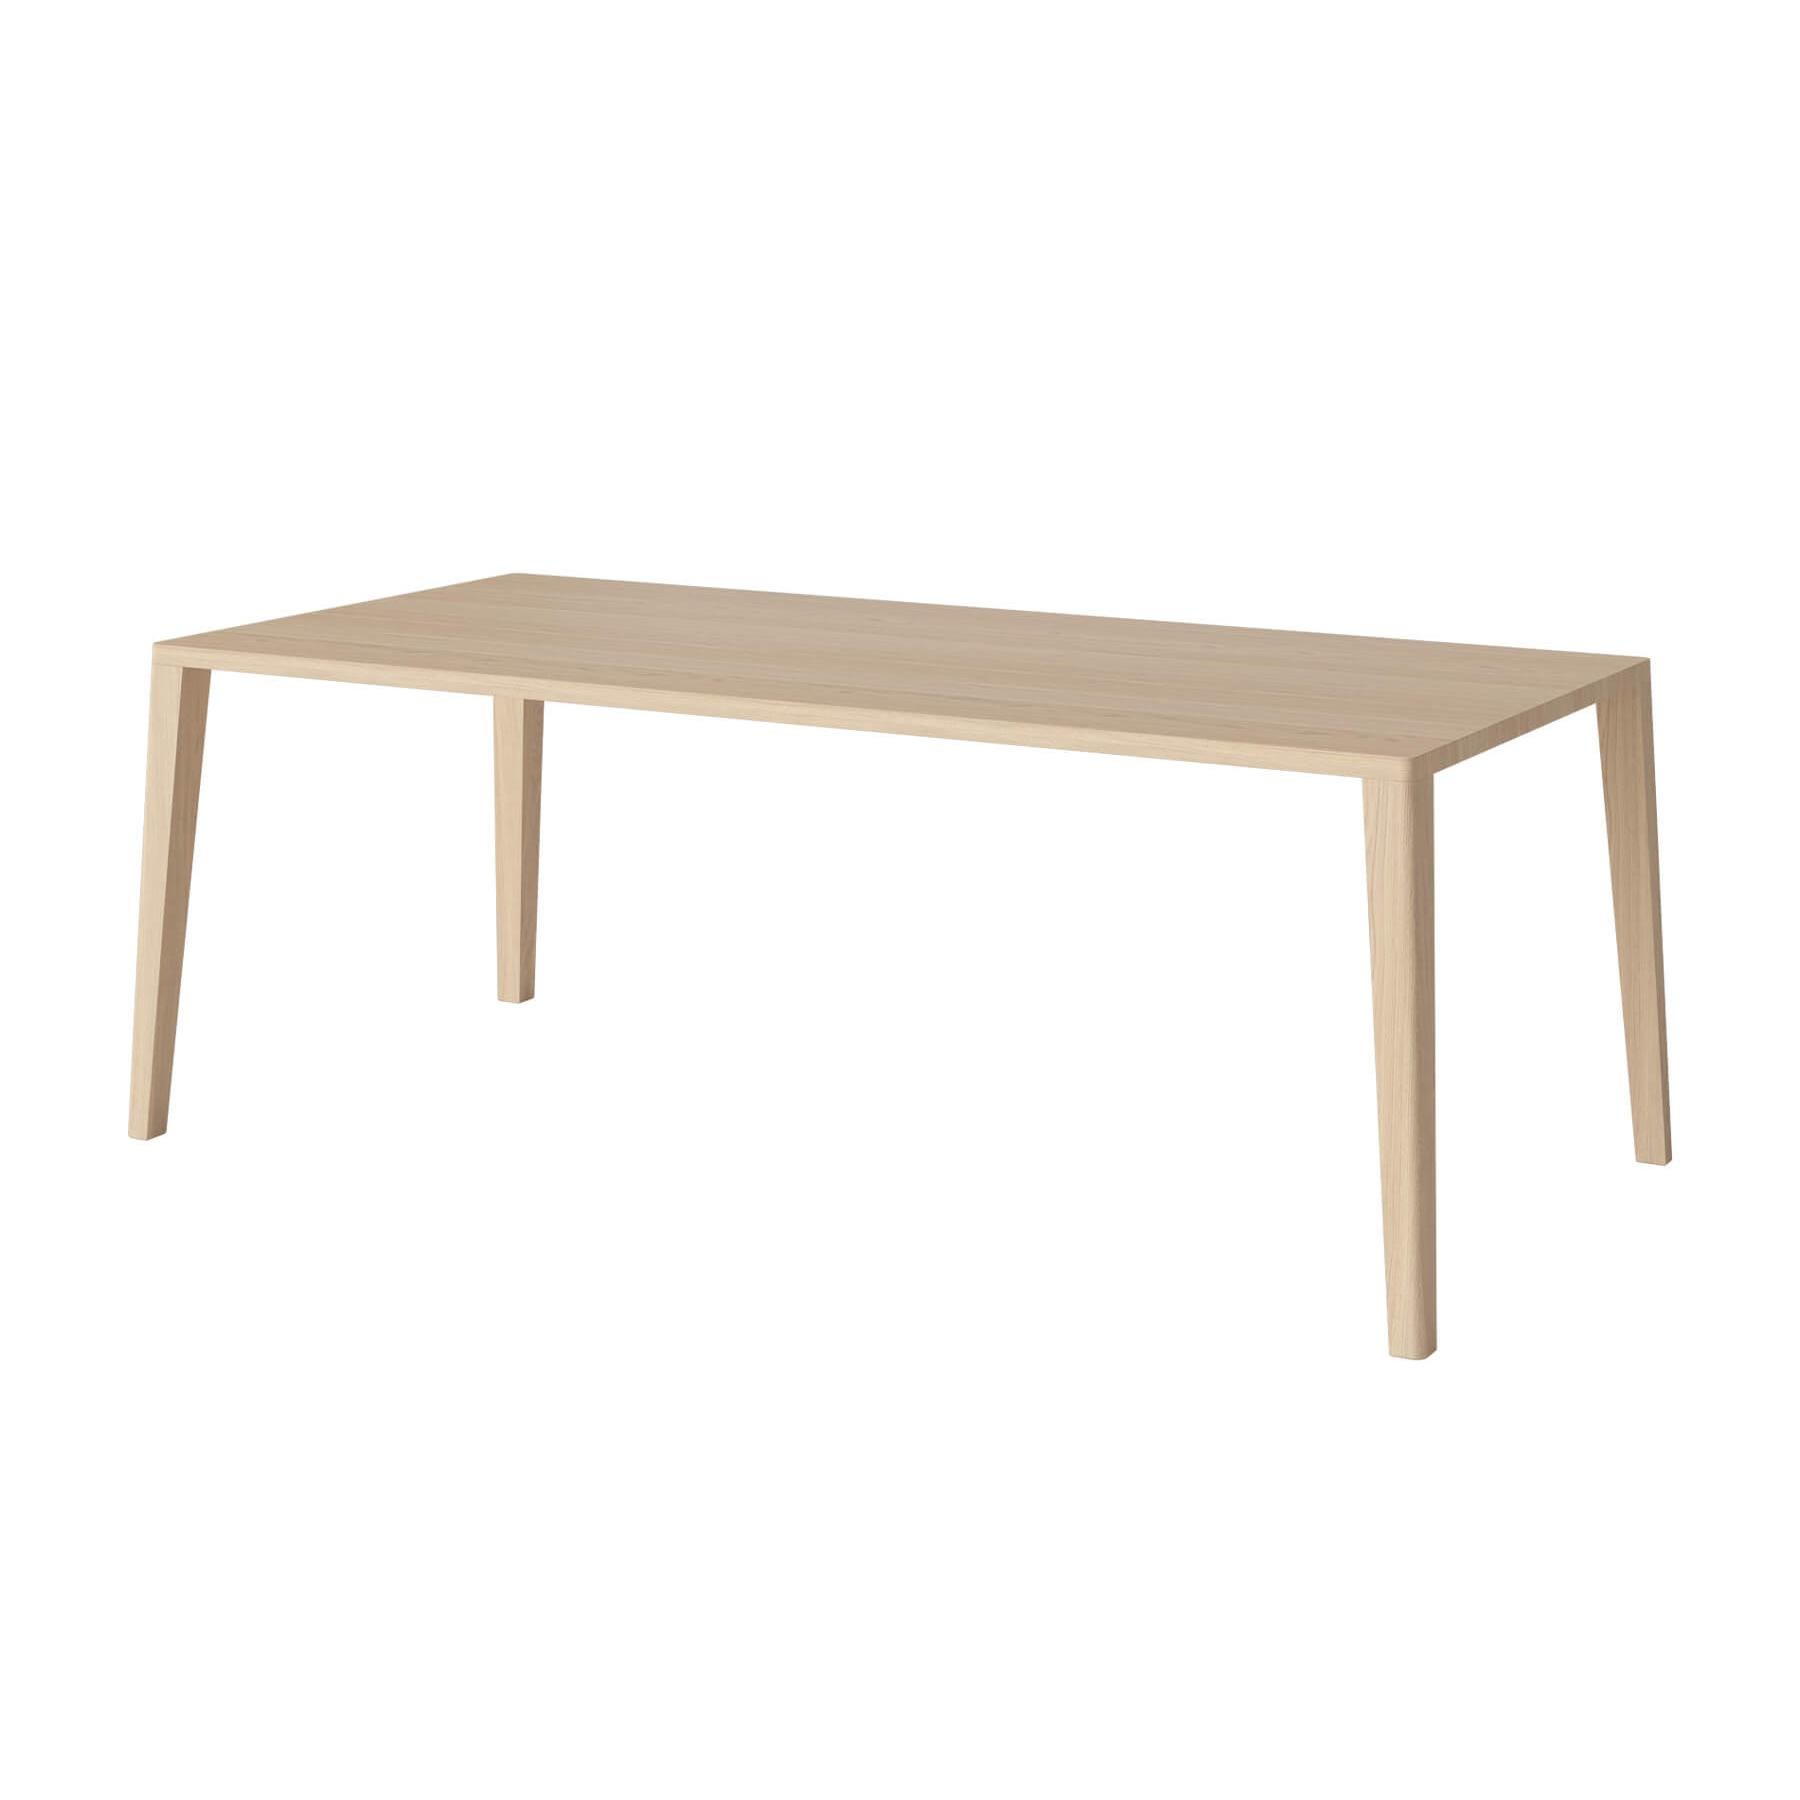 Bolia Graceful Dining Table 200 X 95cm White Oiled Legs Without Extension Leaves Light Wood Designer Furniture From Holloways Of Ludlow